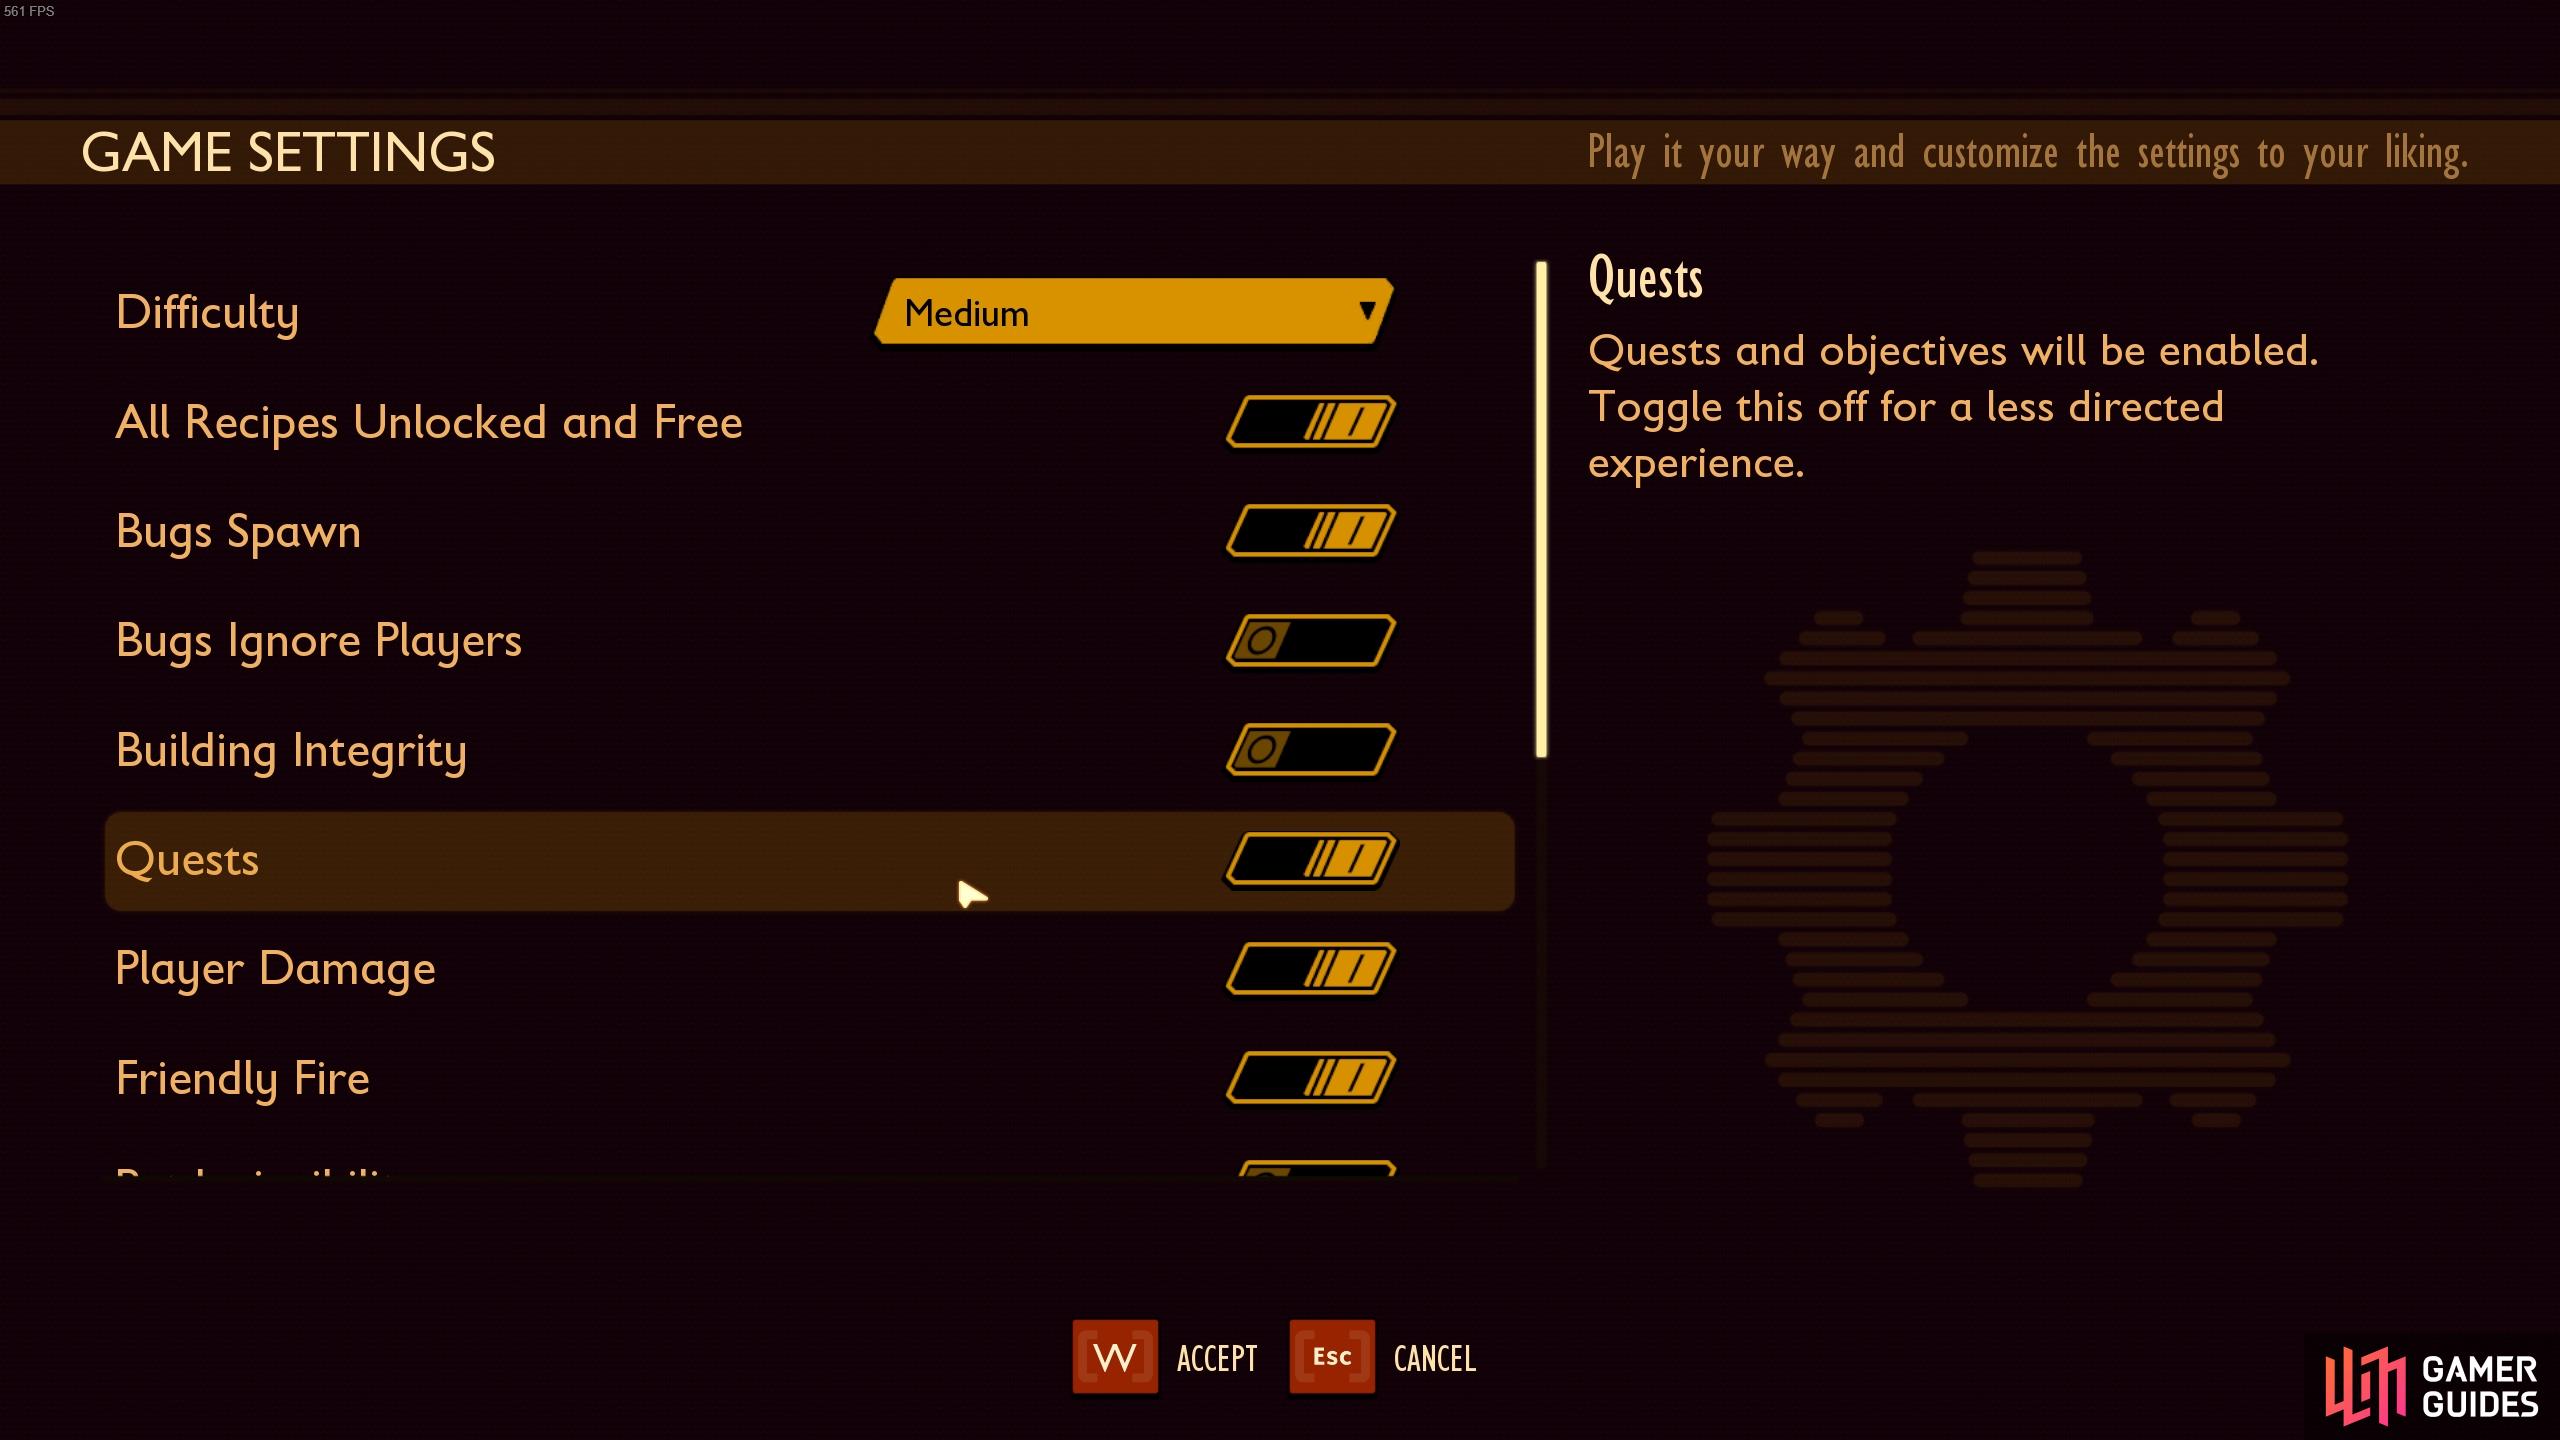 God mode can be enabled alongside all recipes unlocked while retaining quests if you choose custom mode.